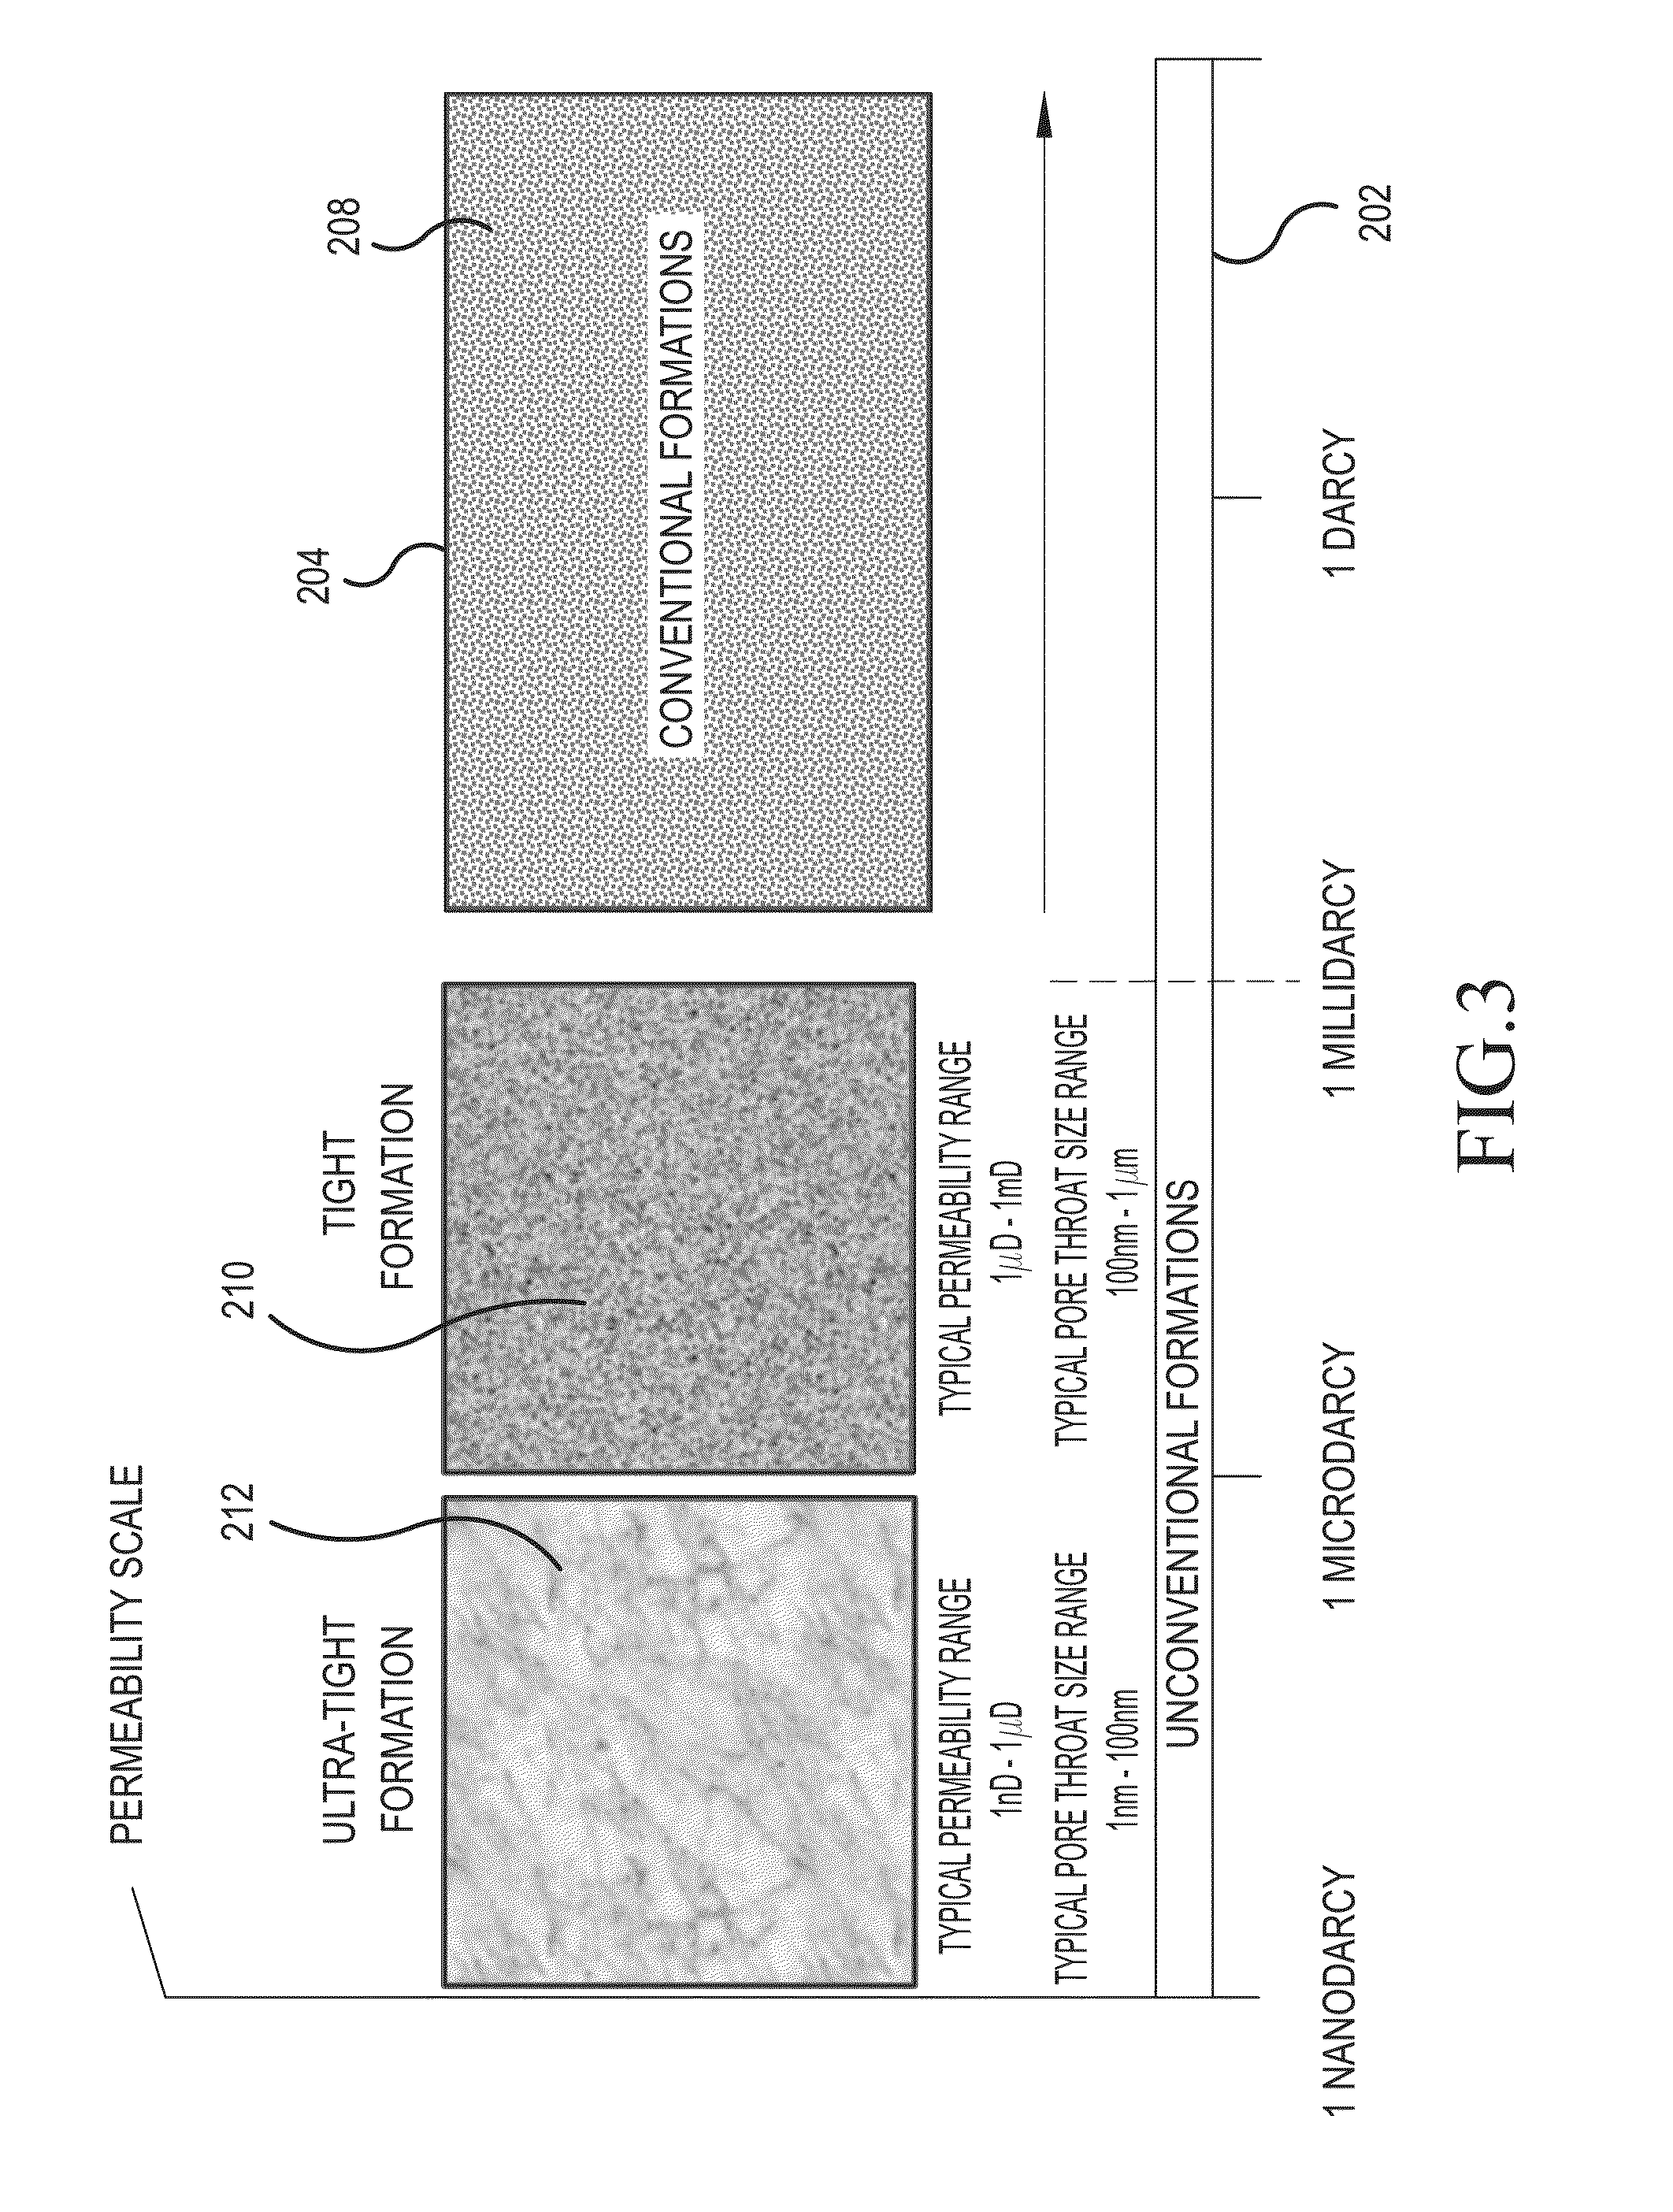 Stimulation method and system for enhancing oil production